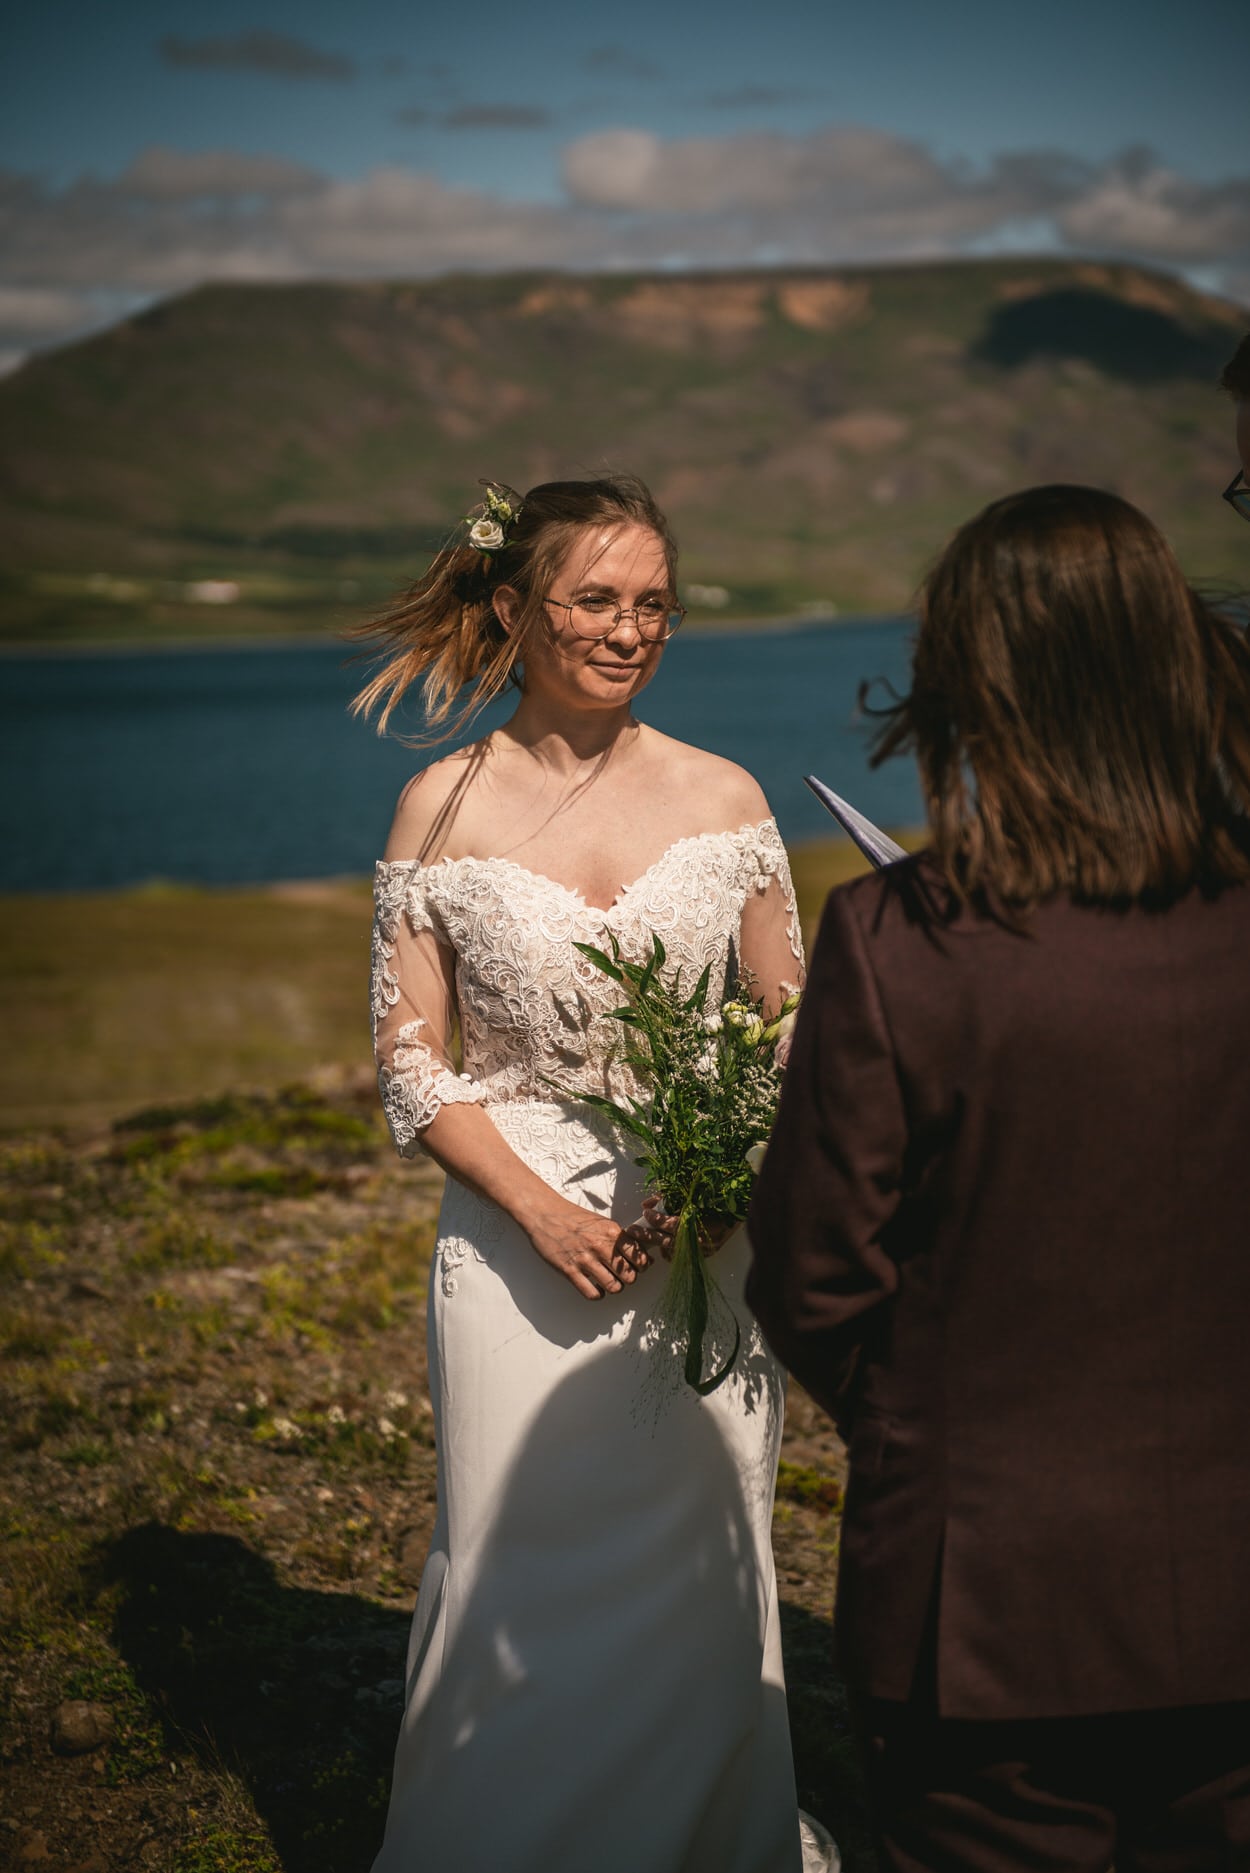 Bride listening to the vows of her bride during their elopement ceremony in Iceland